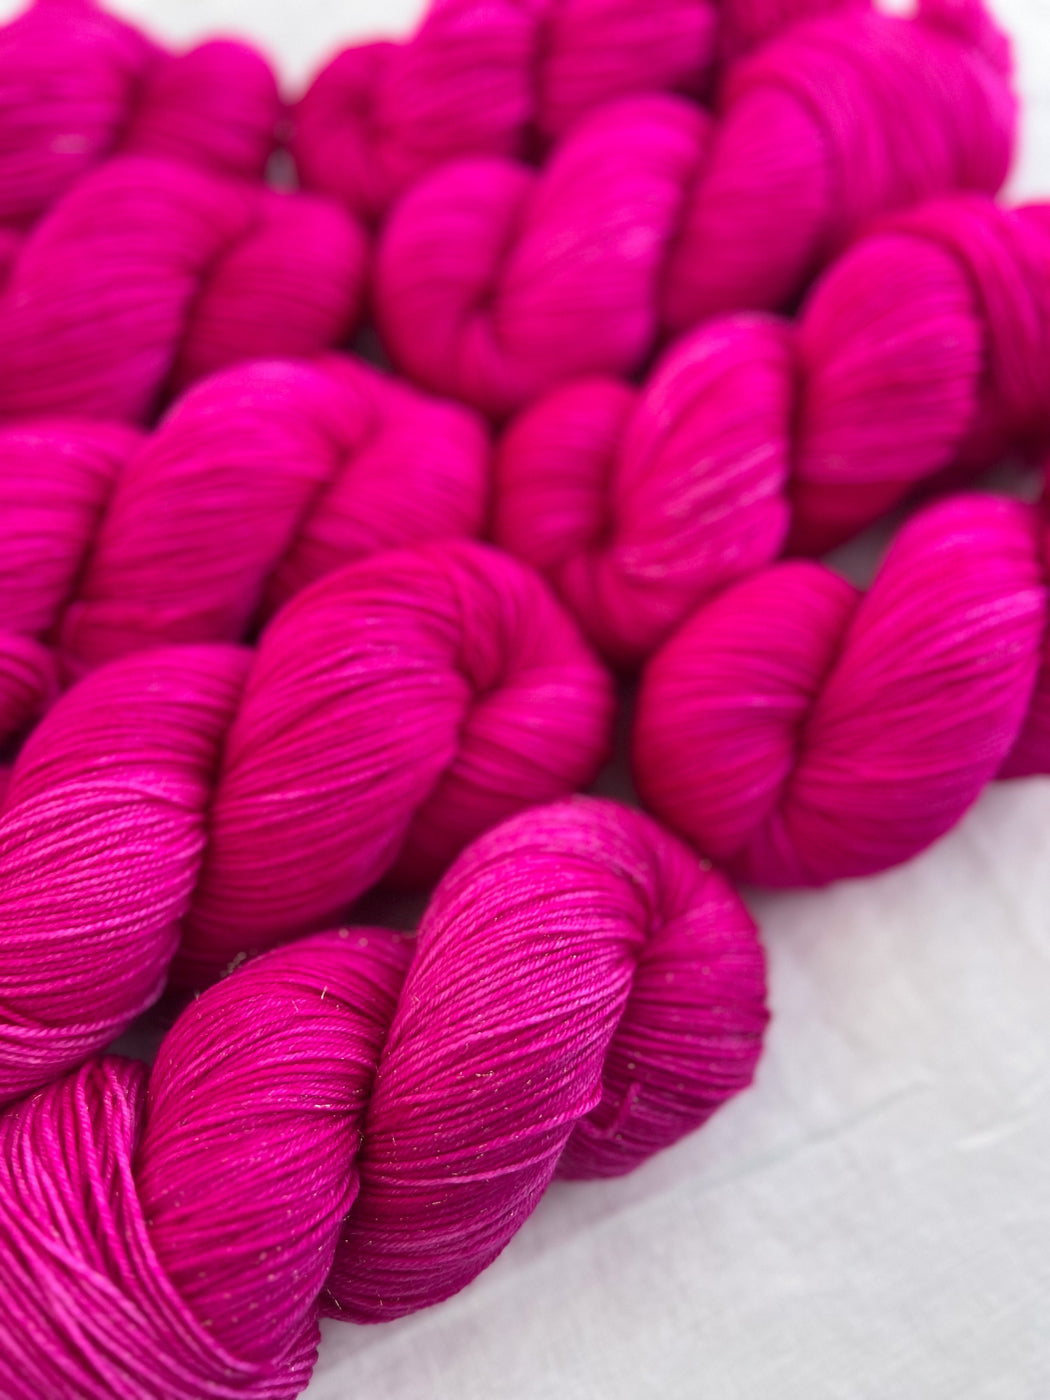 Showstopper - Ruby and Roses Yarn - Hand Dyed Yarn